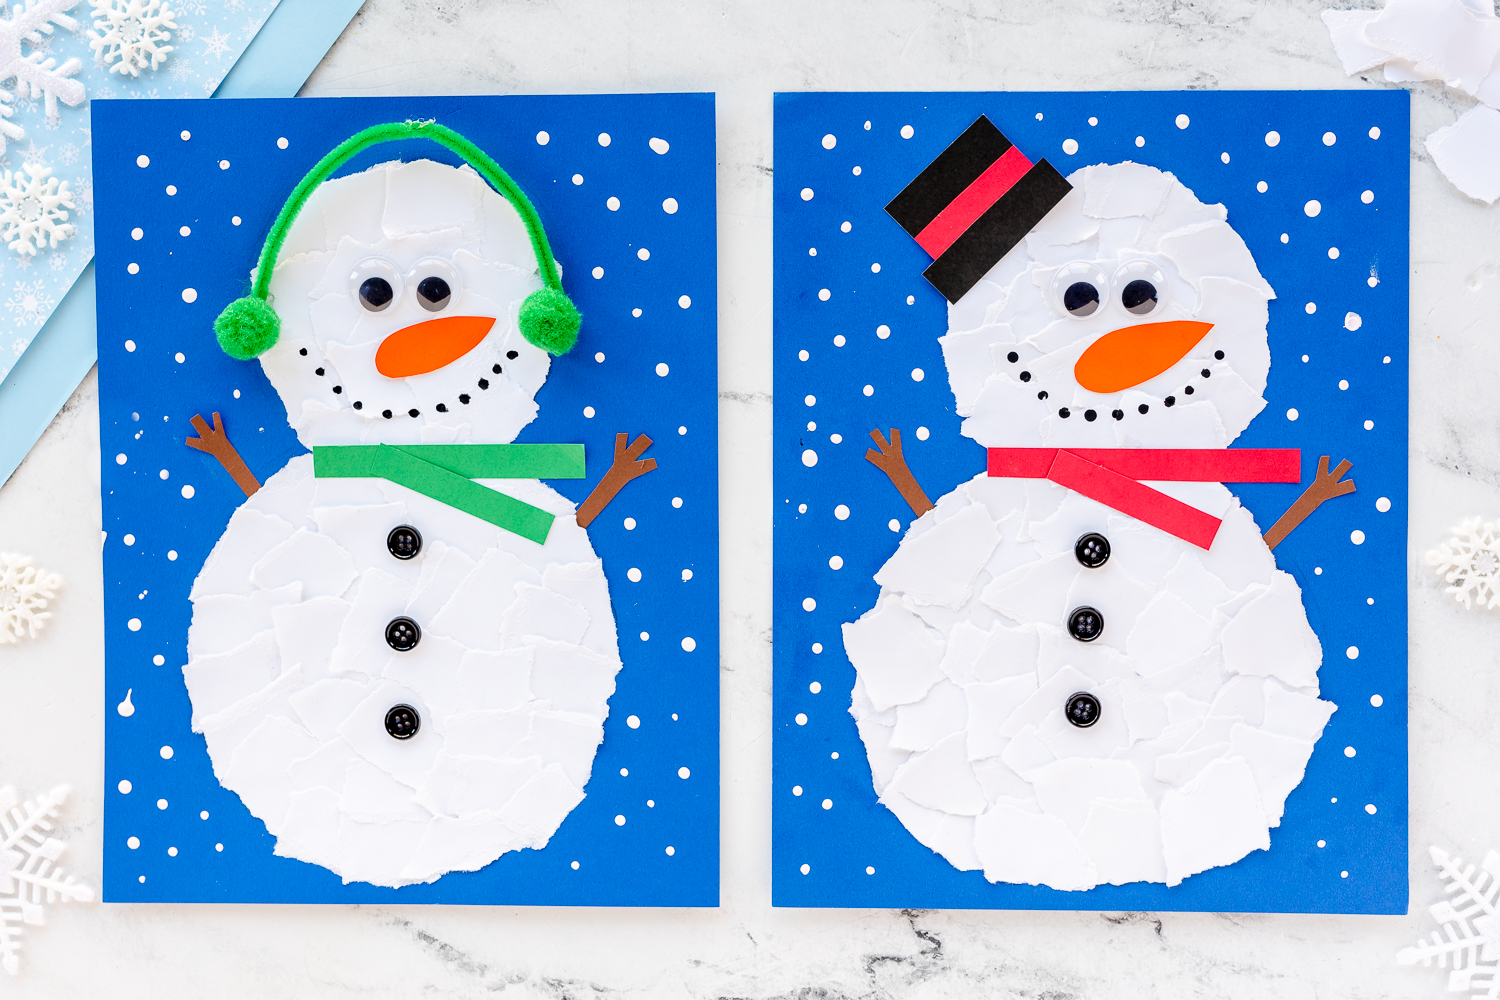 How to make torn paper art projects for preschoolers? - DIY ART PINS